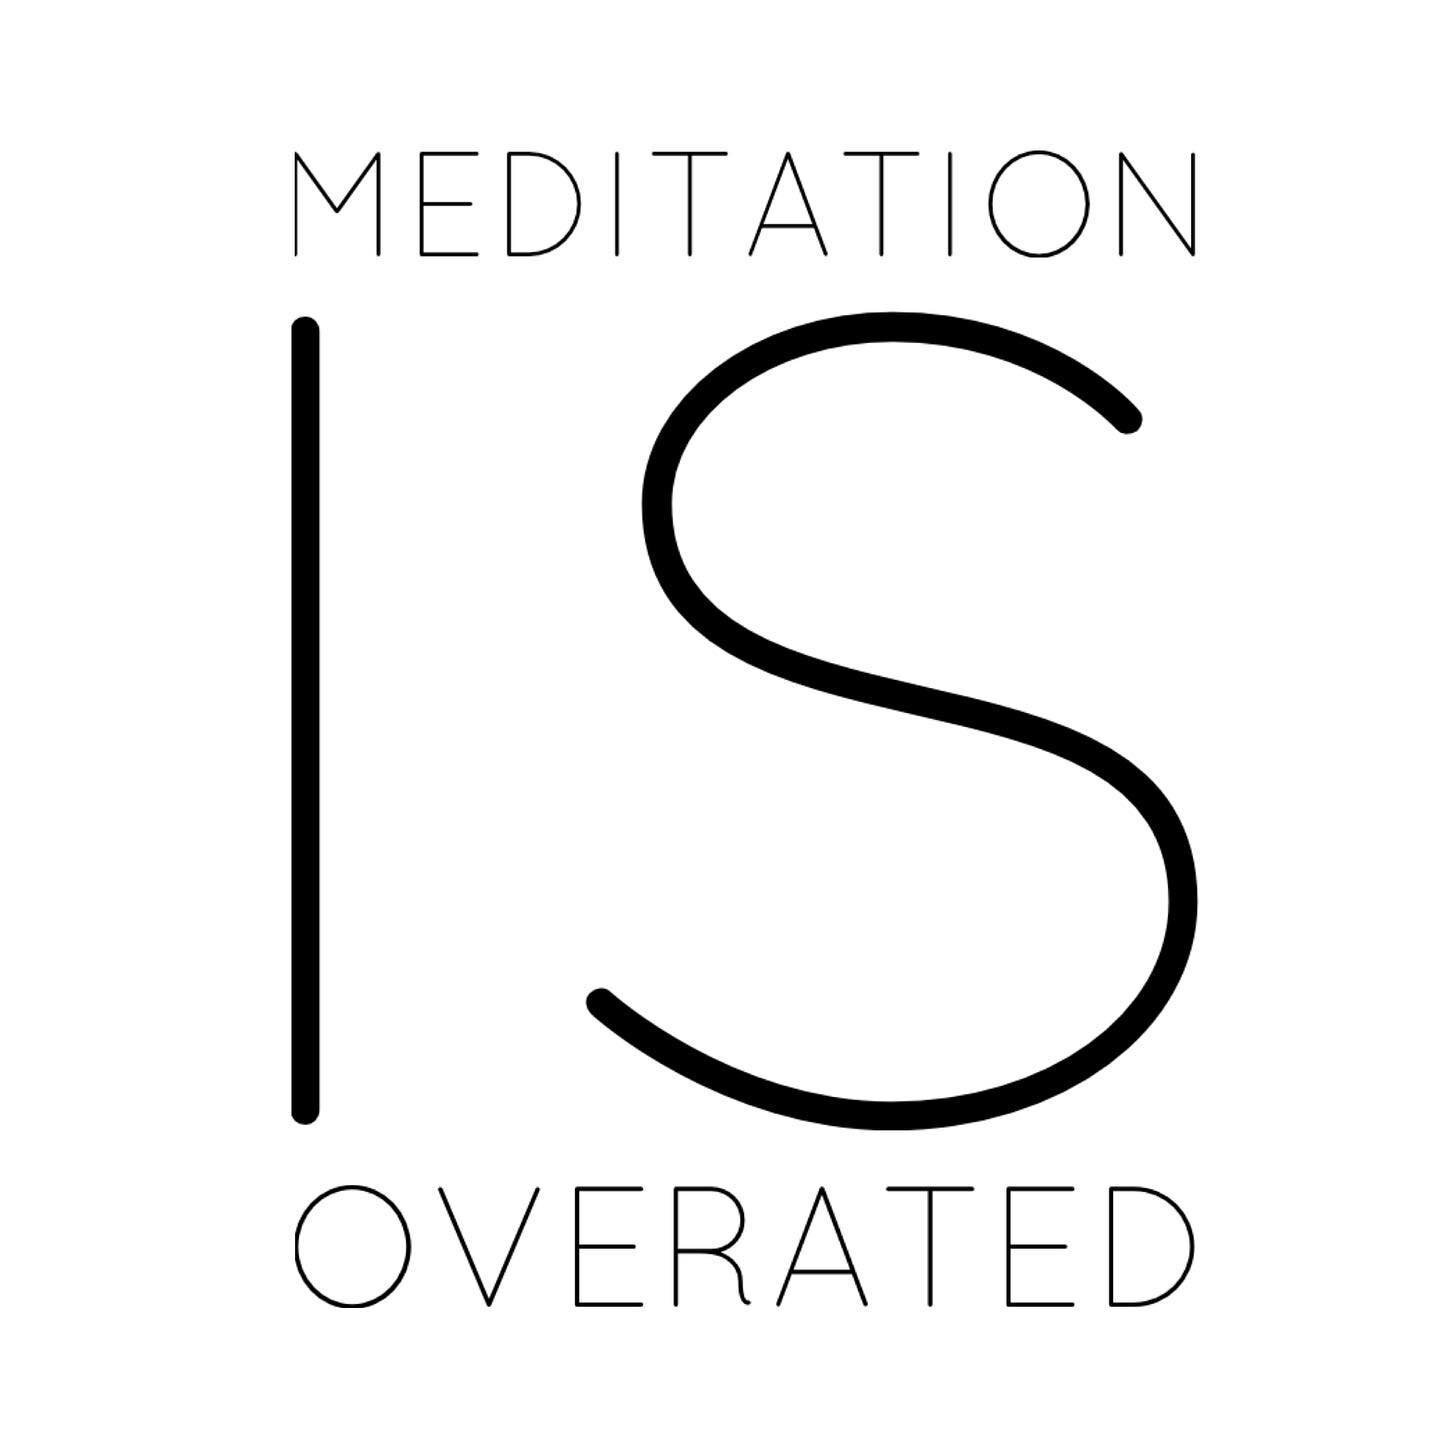 Basically there are a million types of meditation.

Most types of meditation have you bypassing certain emotions before they are felt FULLY &amp; understood deeply with compassion.

This means you are blocking certain emotions and that you do not hav